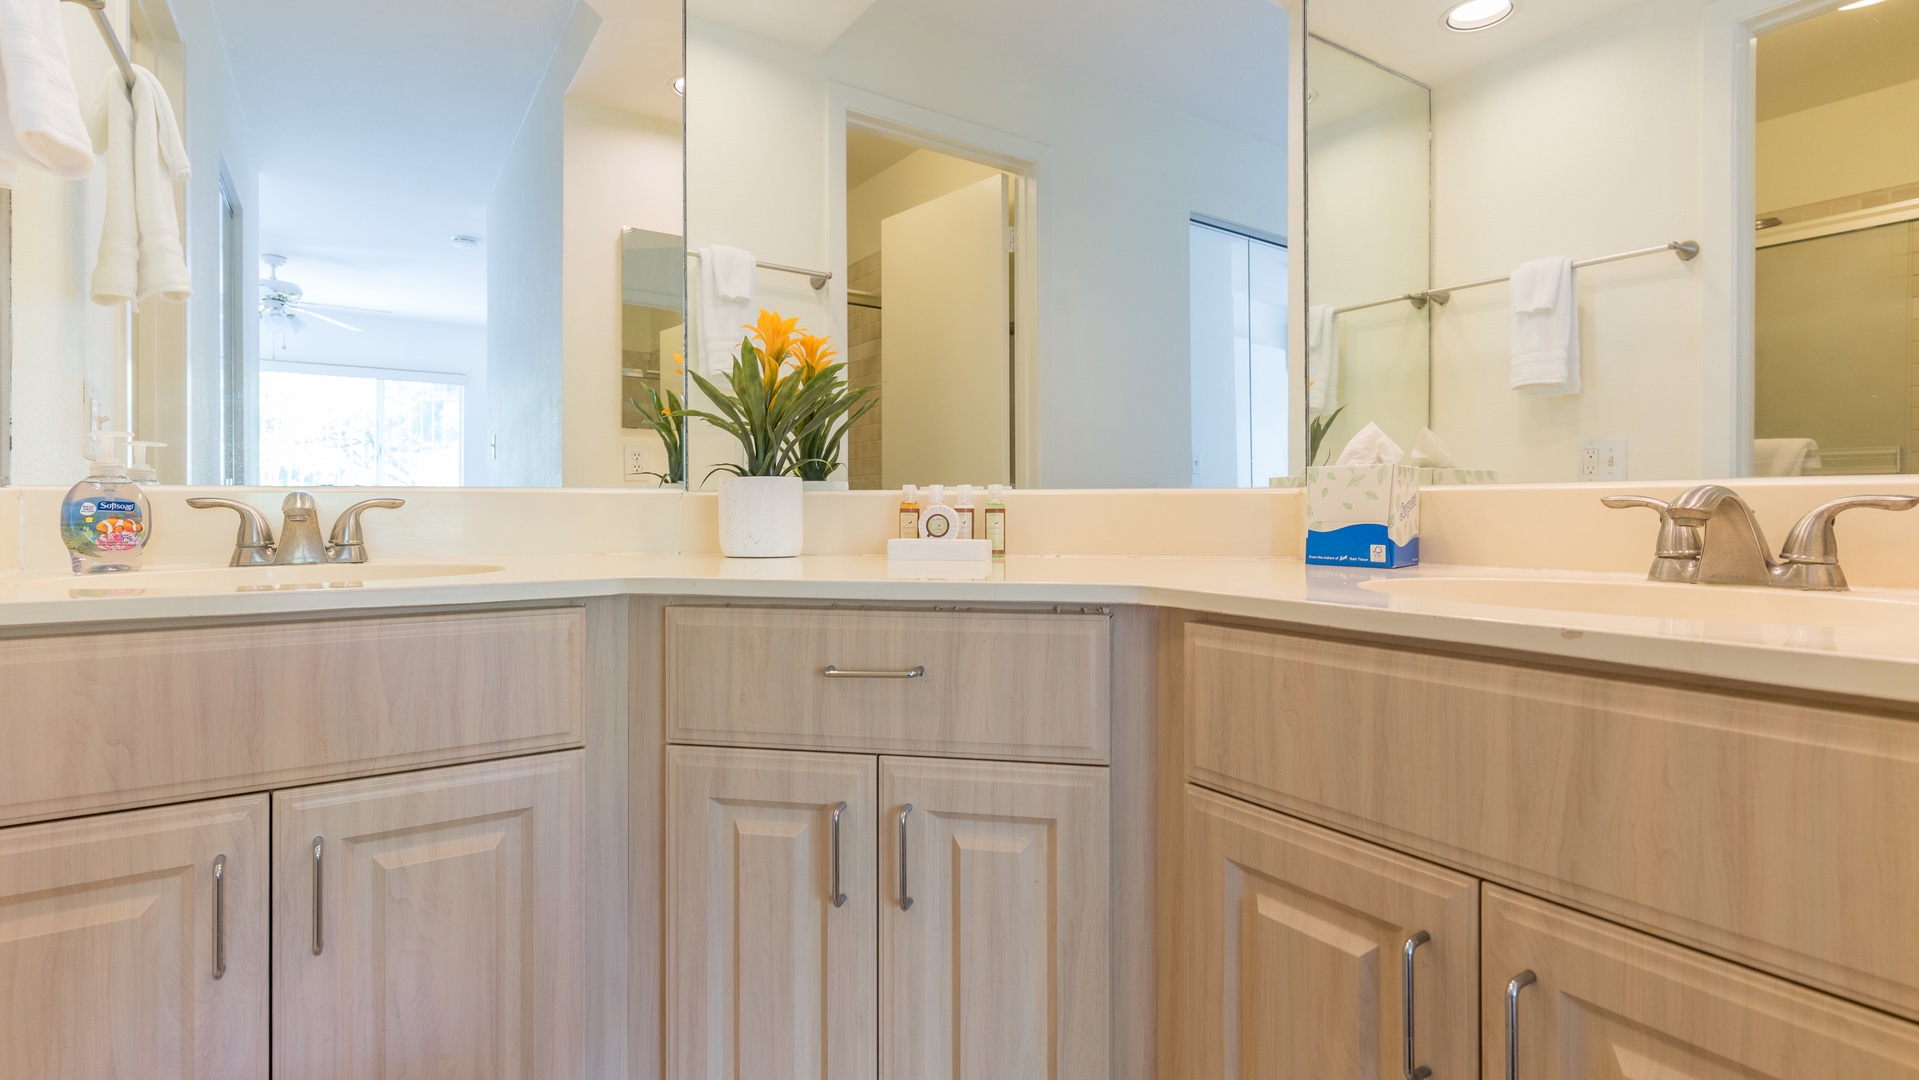 Kapolei Vacation Rentals, Fairways at Ko Olina 27H - The primary bathroom with a double vanity upstairs.